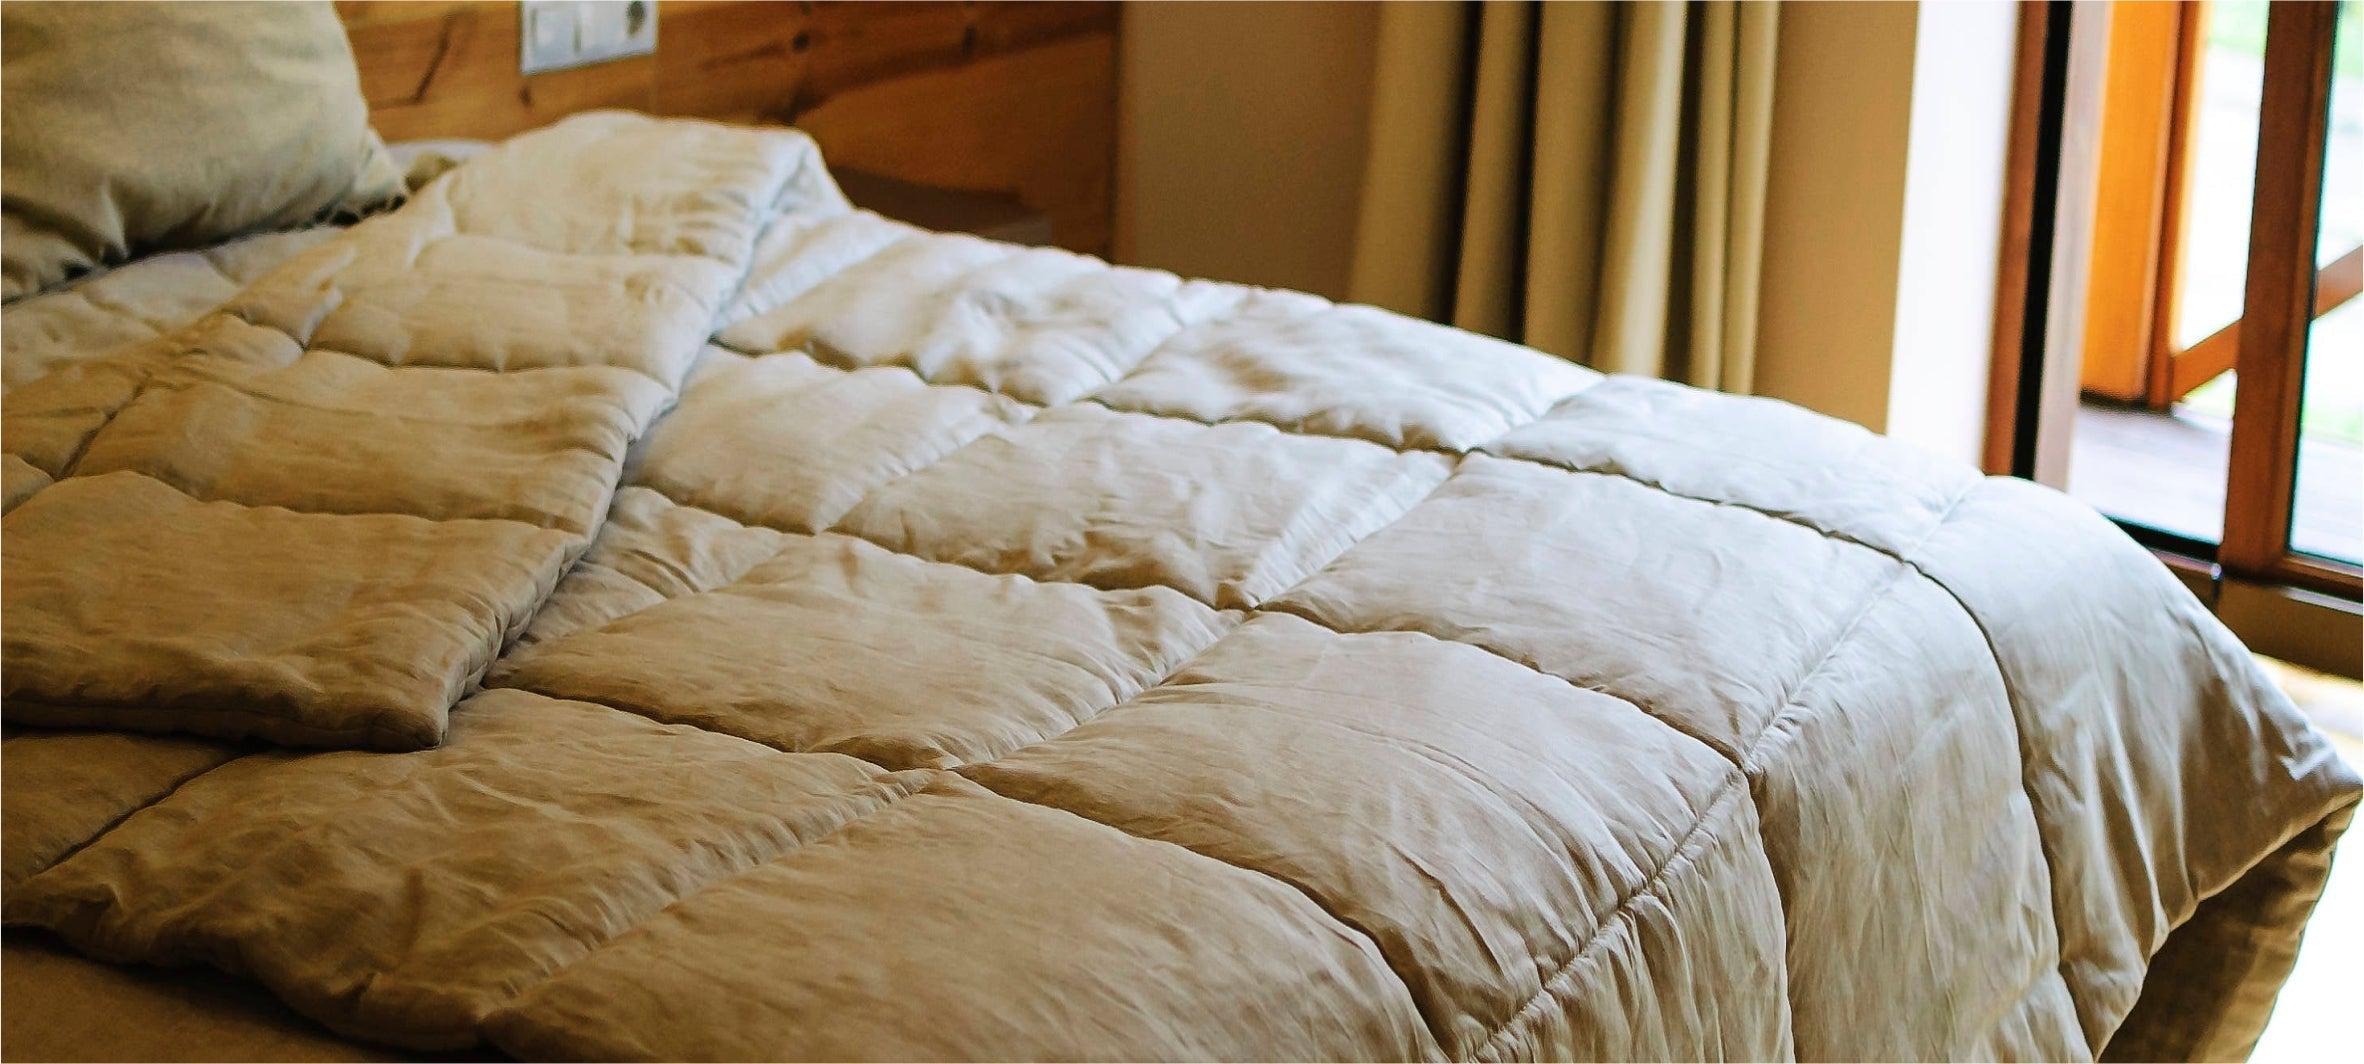 The Magic of Polyester Fiber Fill in Bedding